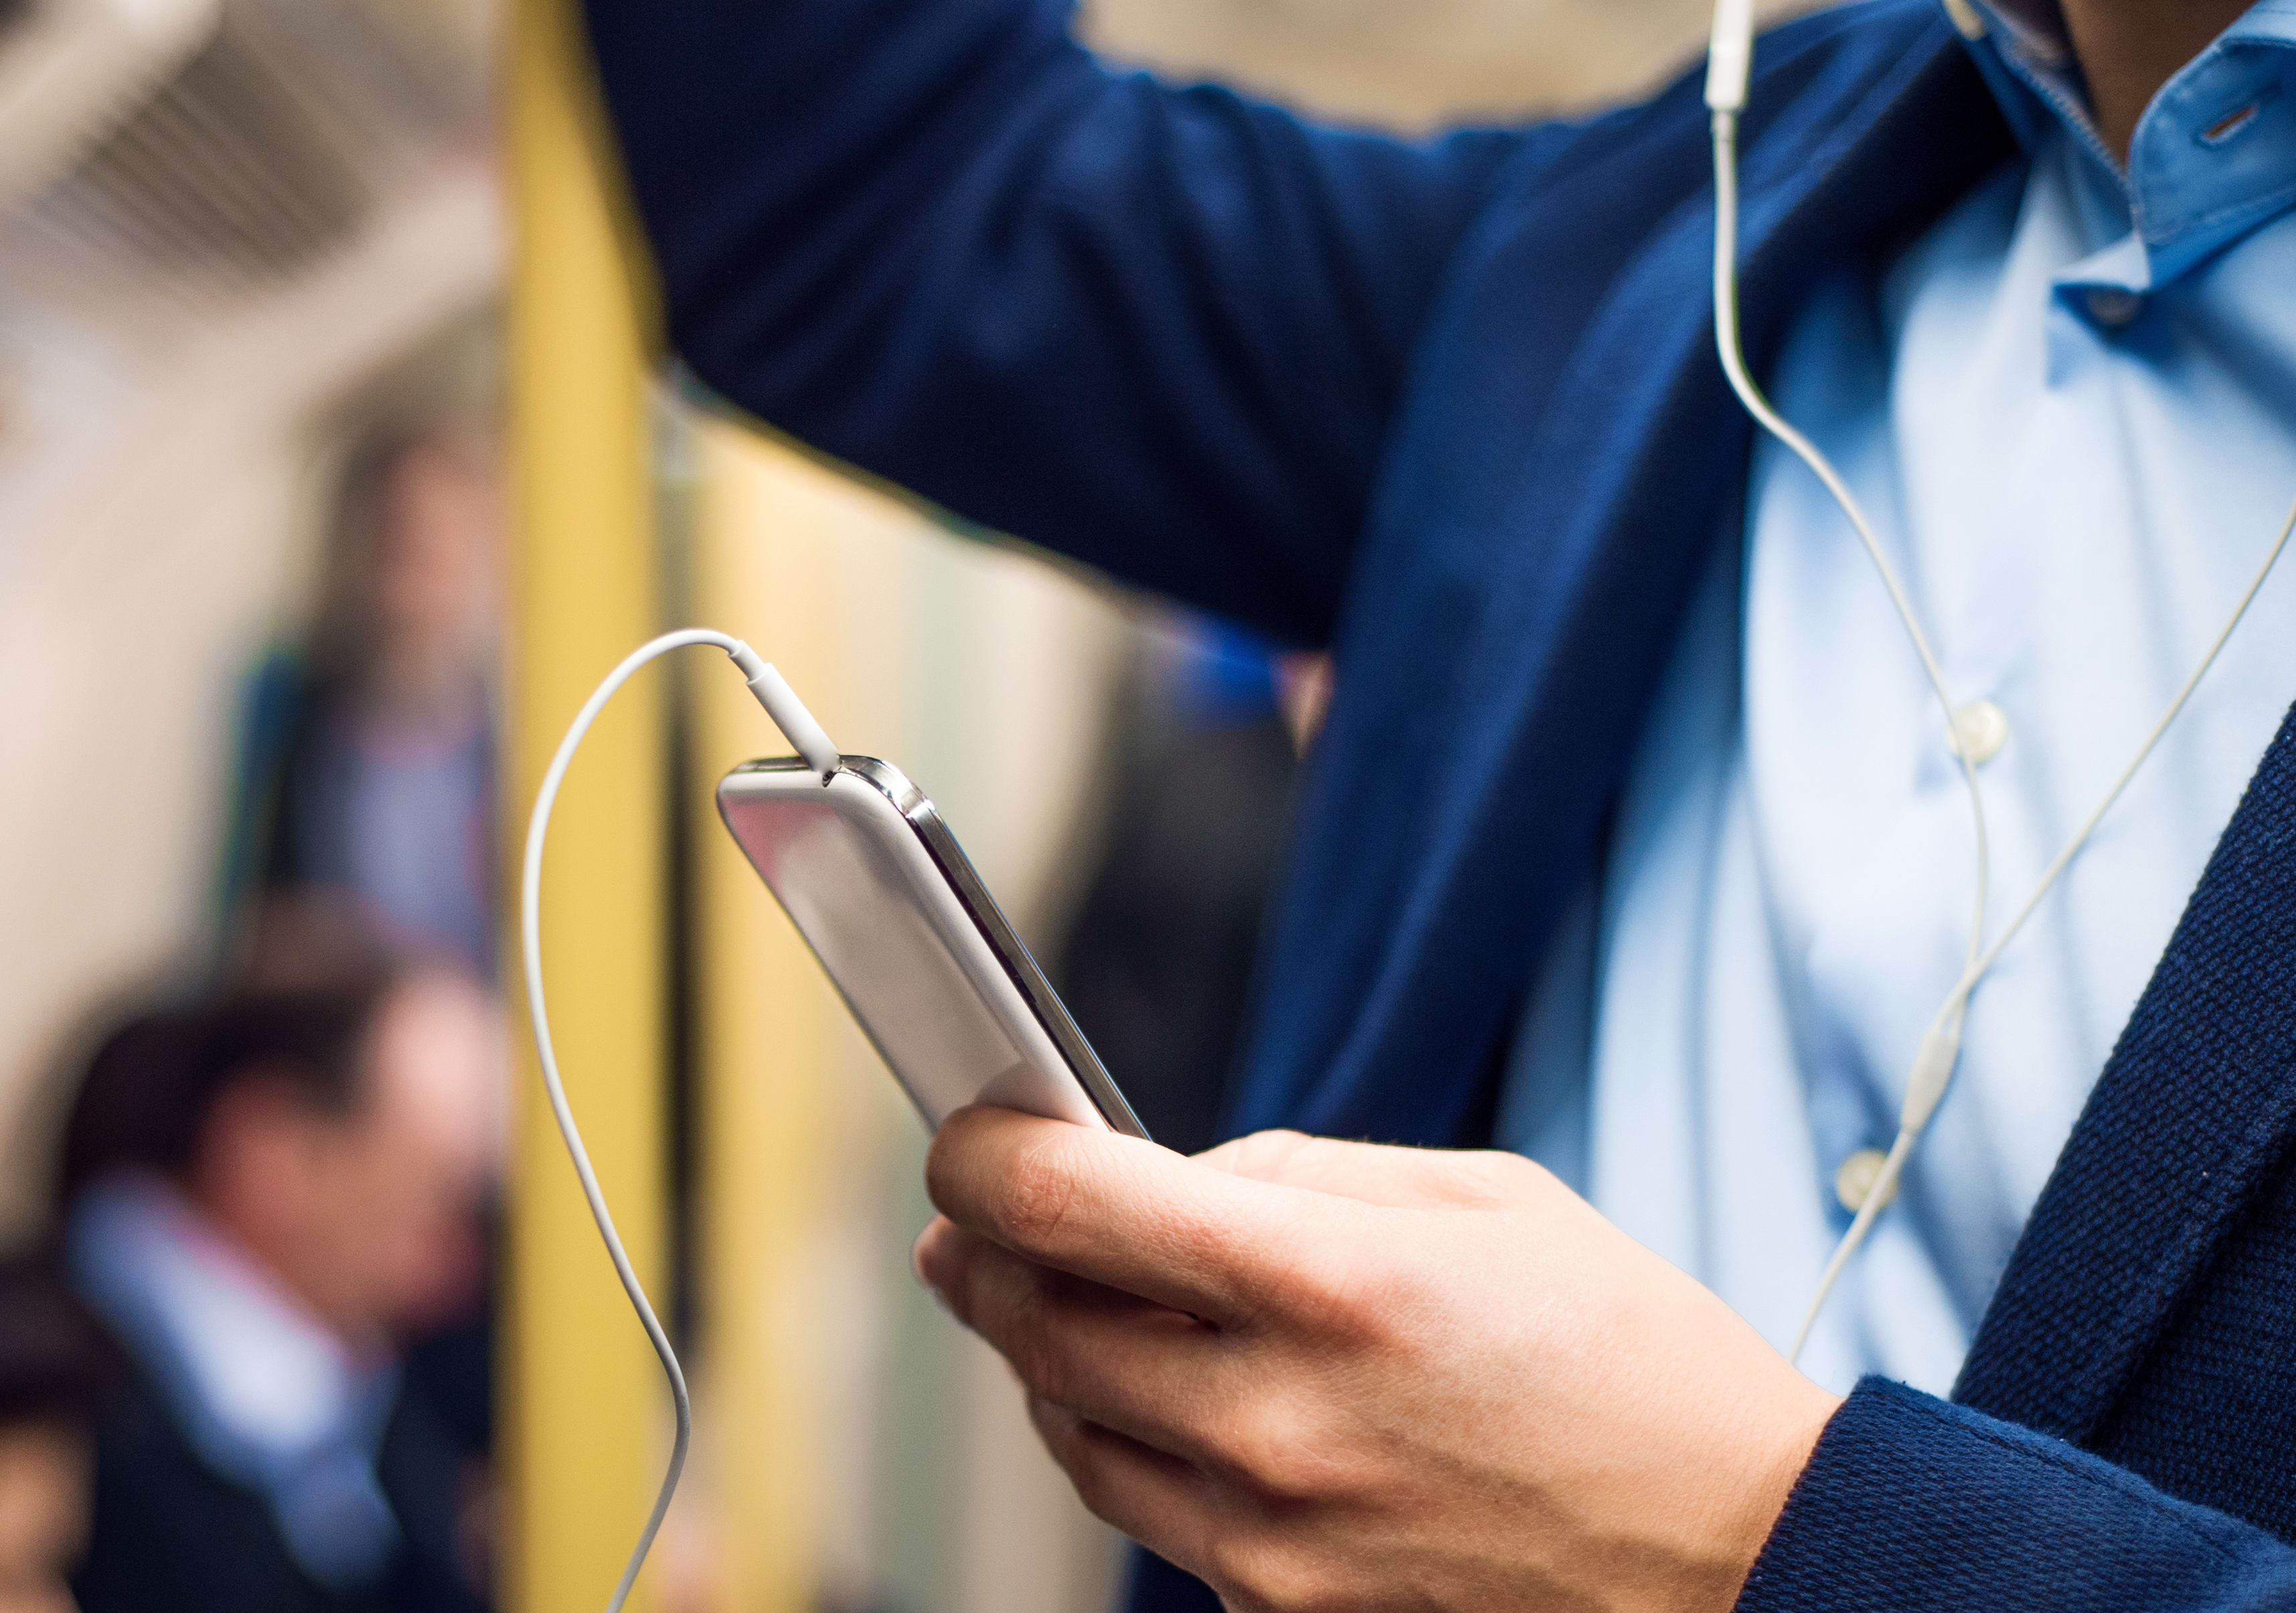 A man wearing headphones uses his smartphone on a train.